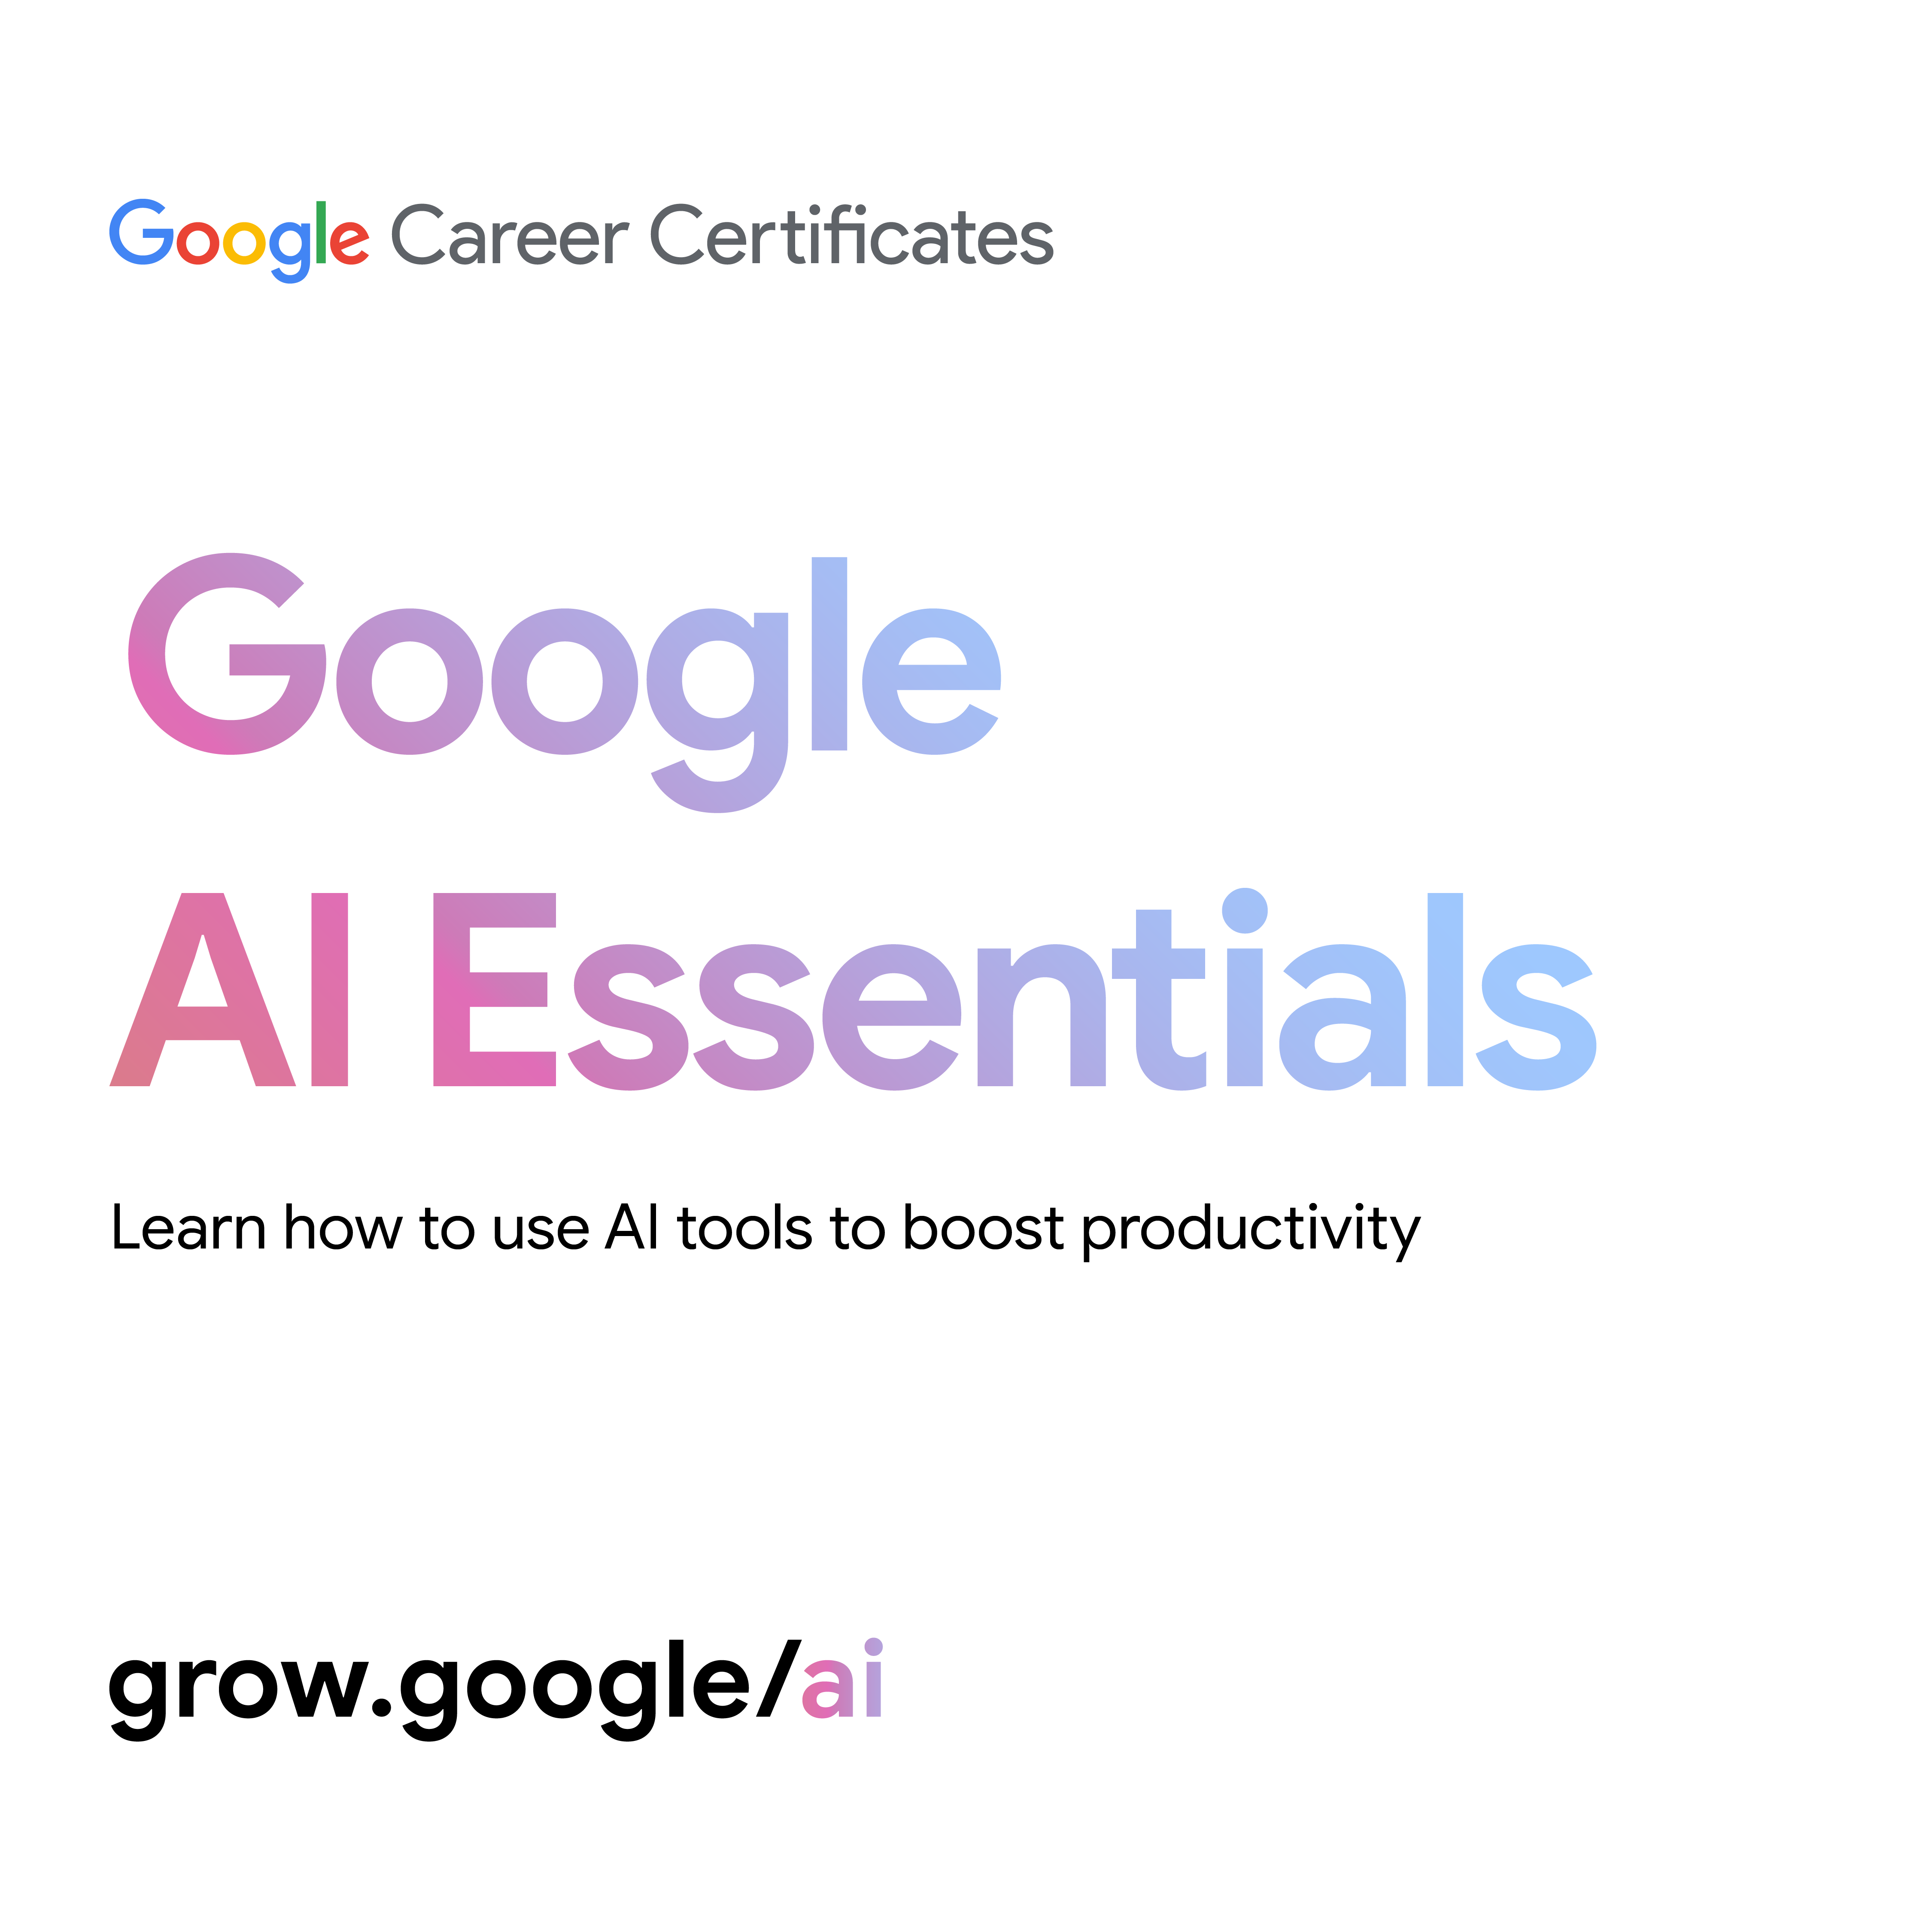 Grow with Google launches new AI Essentials course to help everyone learn to use AI